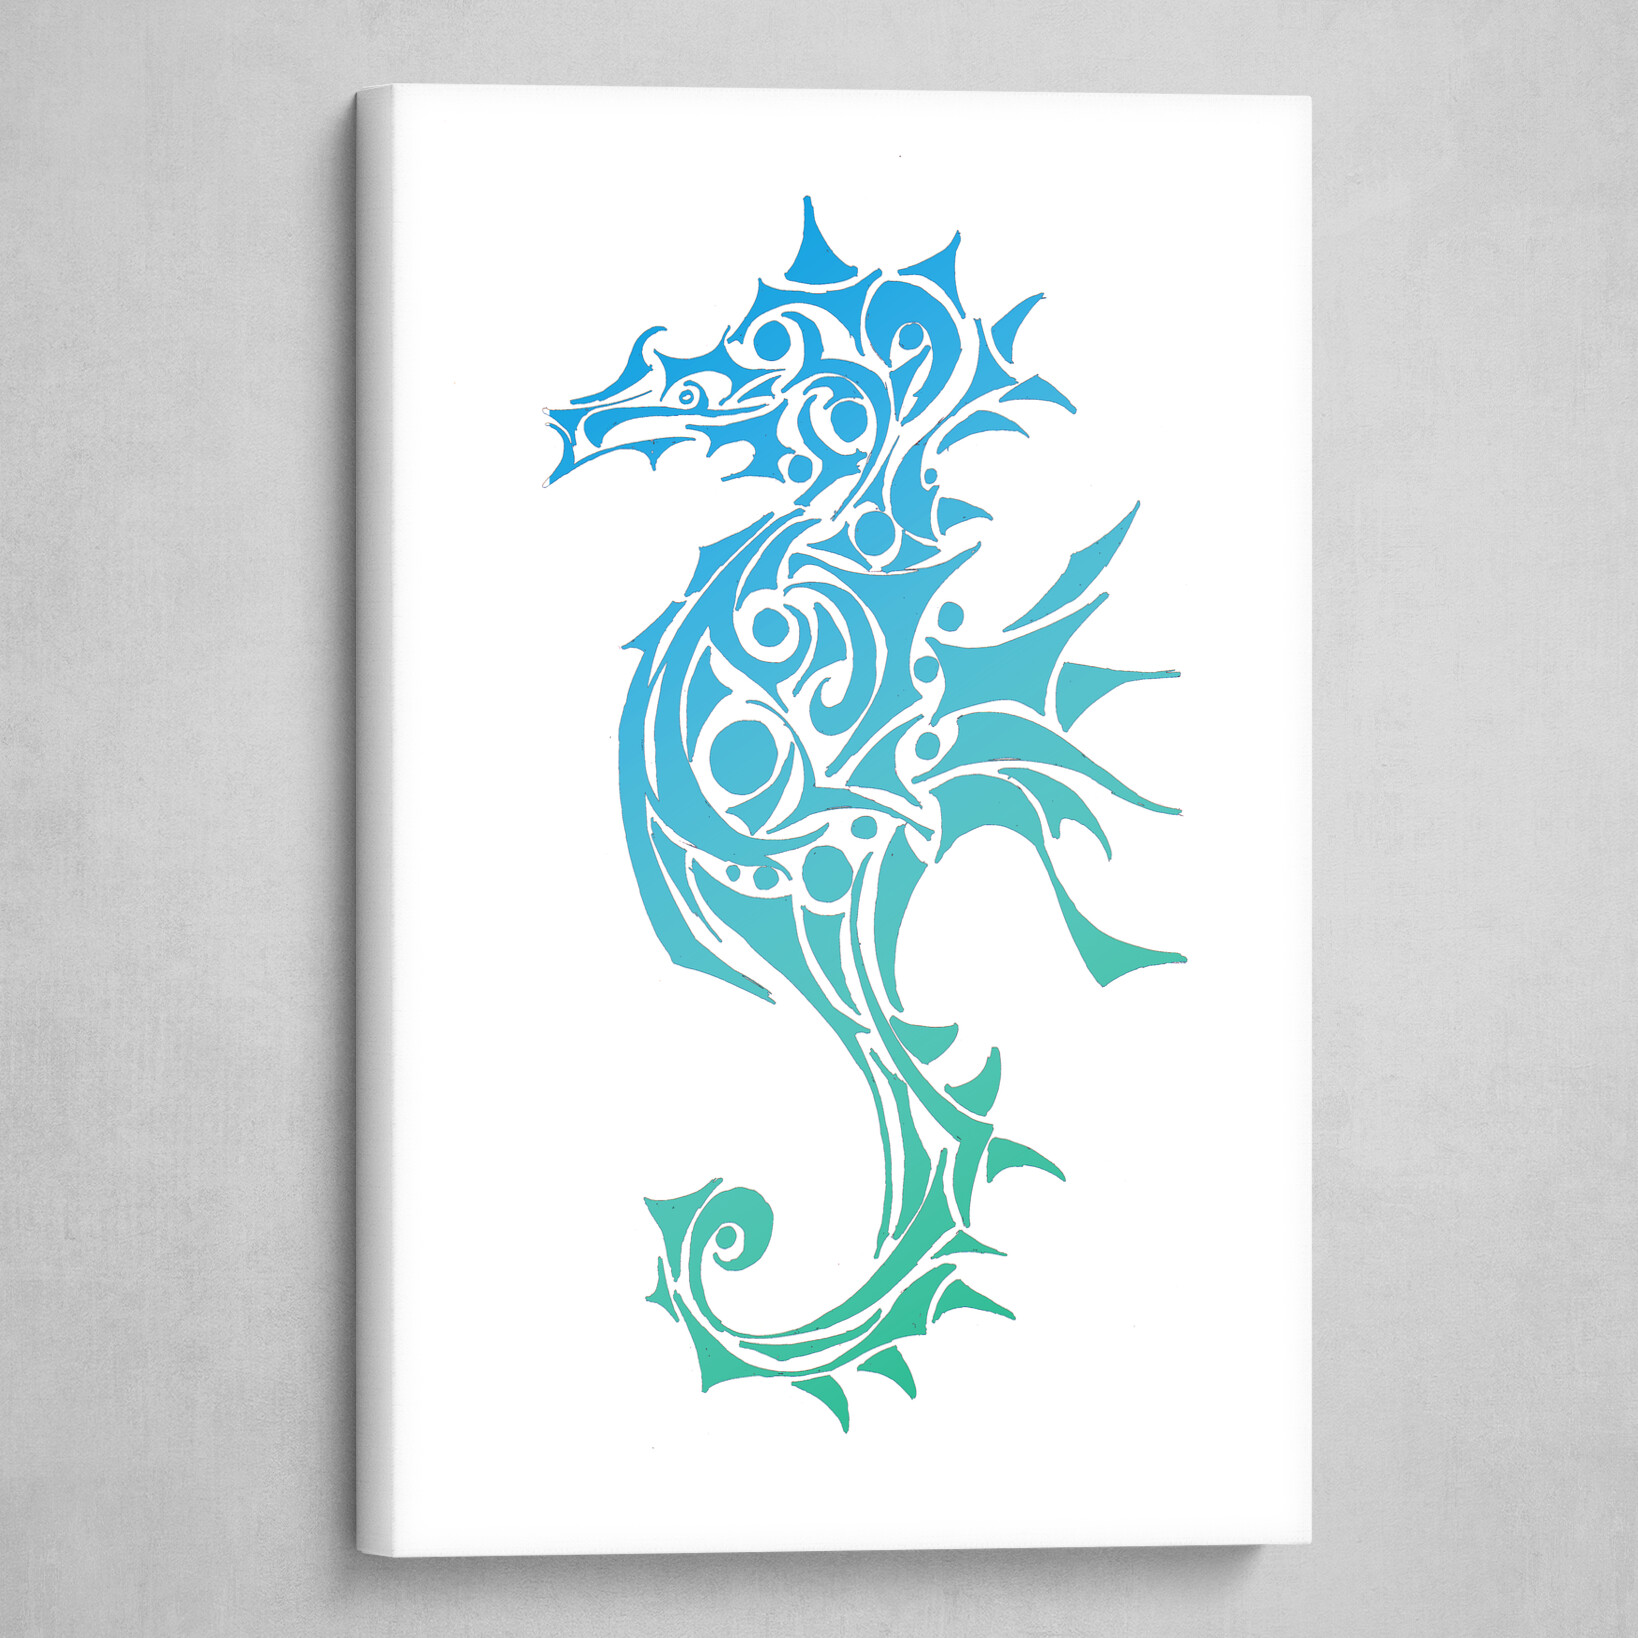 Buy Seahorse Outline: Choose Your Style Temporary Tattoo Sea Horse Swirls  Underwater Animal Fish Small Cute Tattoo Online in India - Etsy